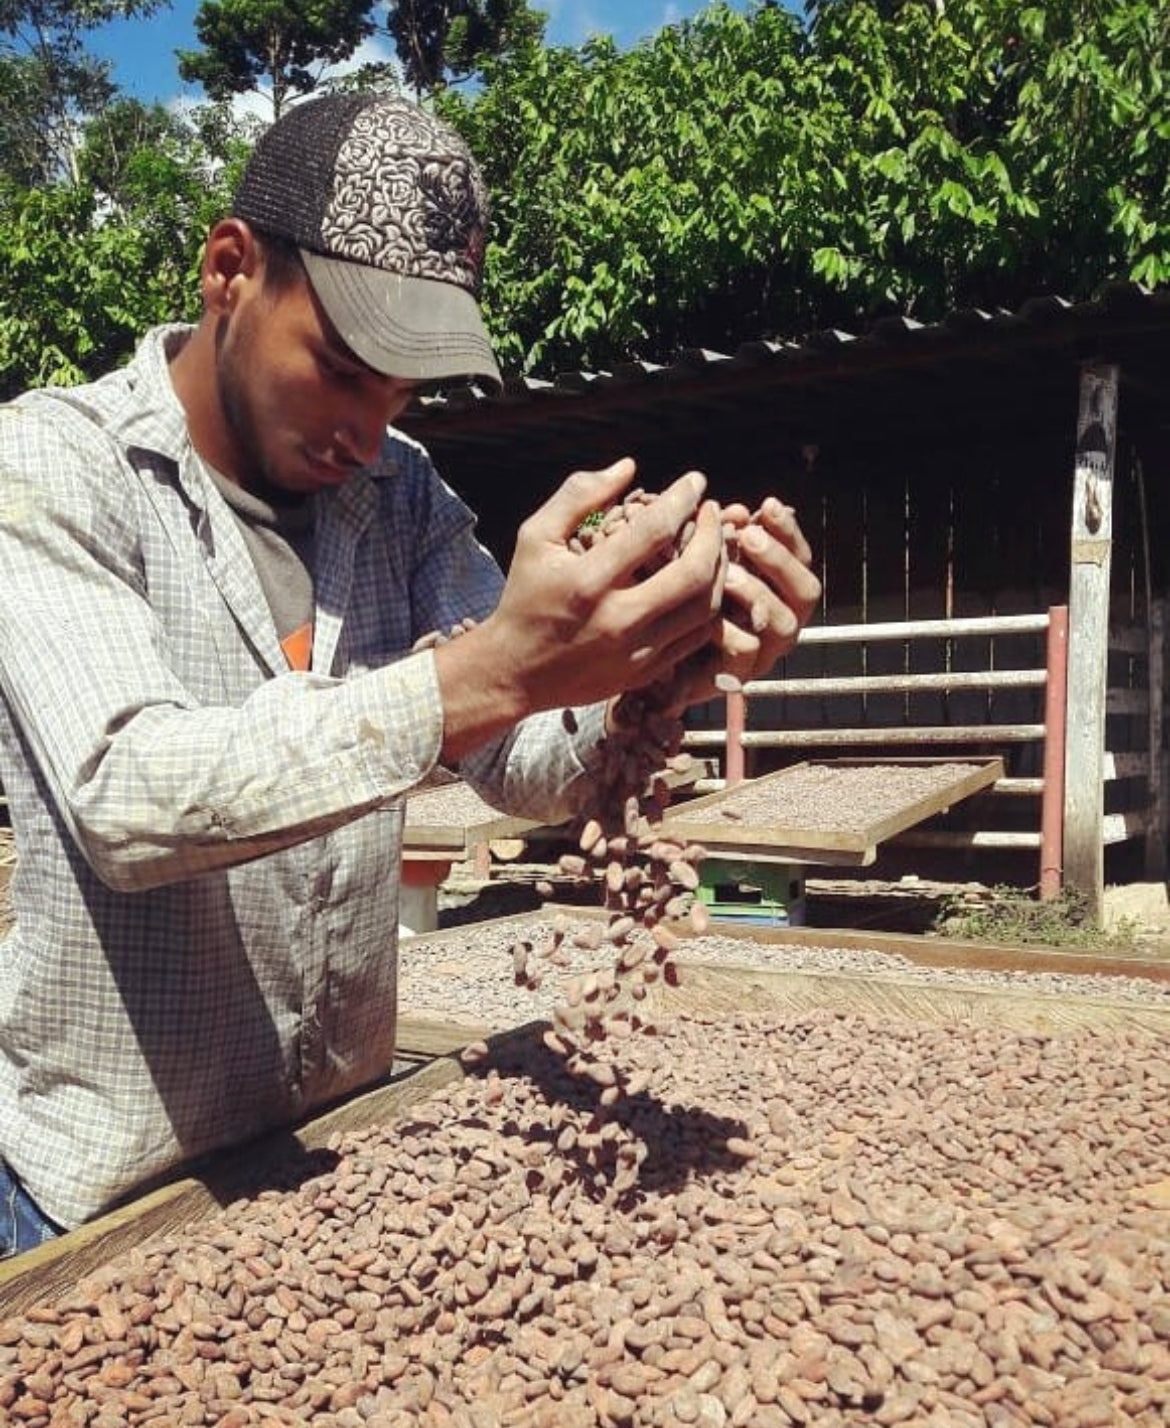 Man sifting through the beans with two hands.  